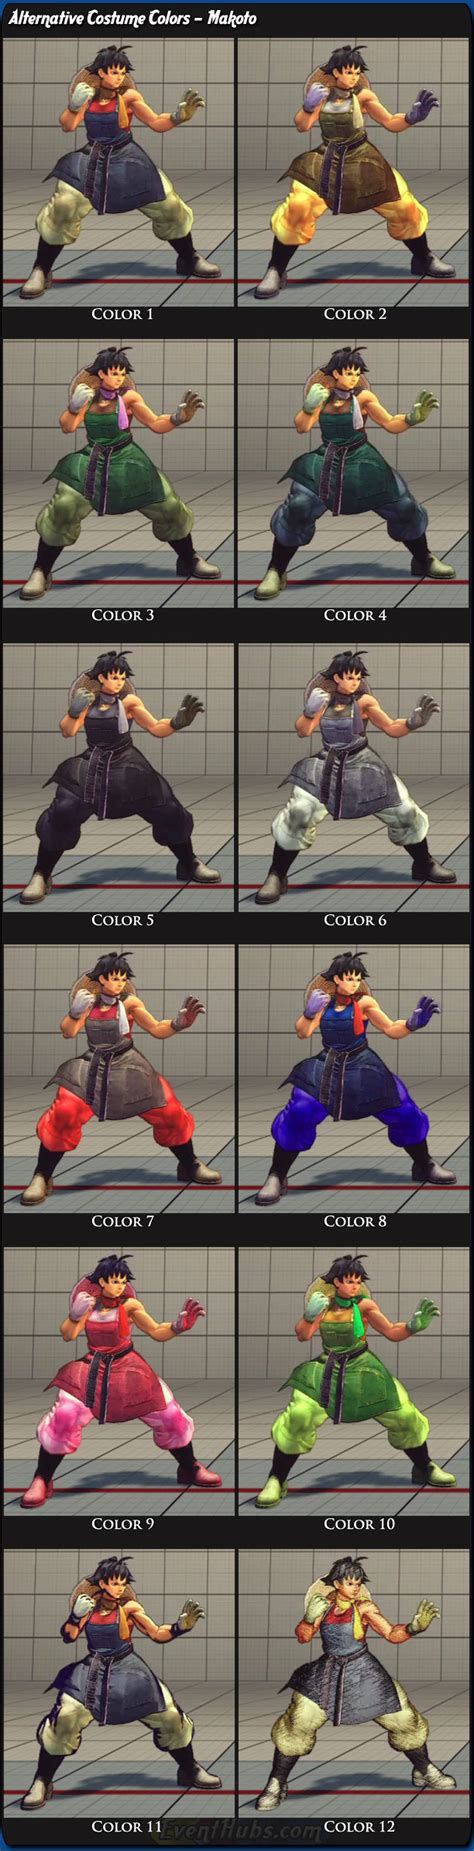 Costume And Alternative Outfit Colors For Makoto In Super Street